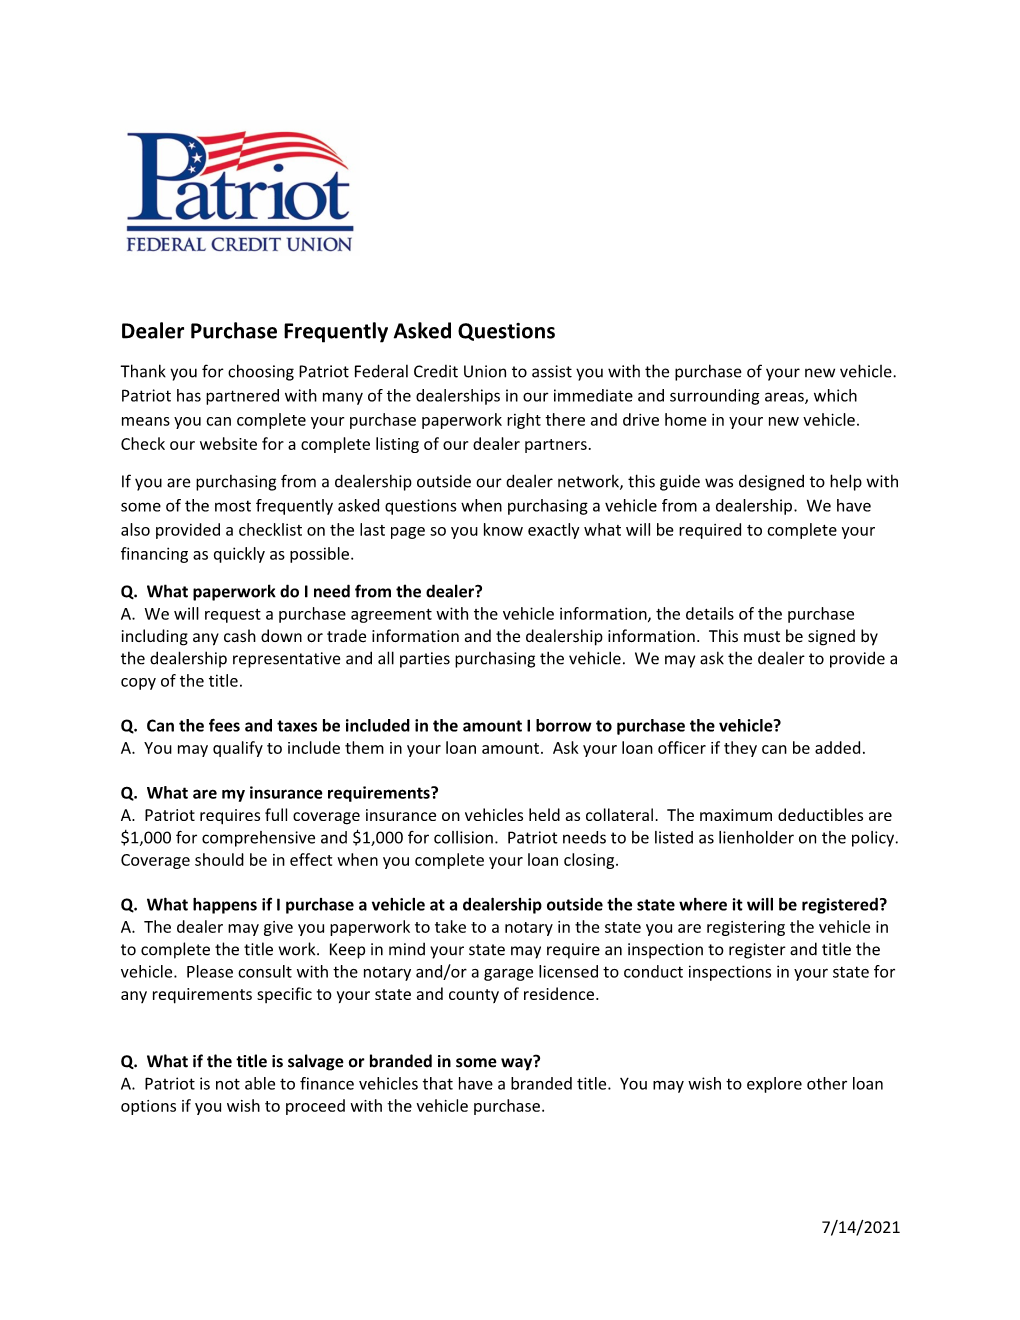 Dealer Purchase Frequently Asked Questions Thank You for Choosing Patriot Federal Credit Union to Assist You with the Purchase of Your New Vehicle